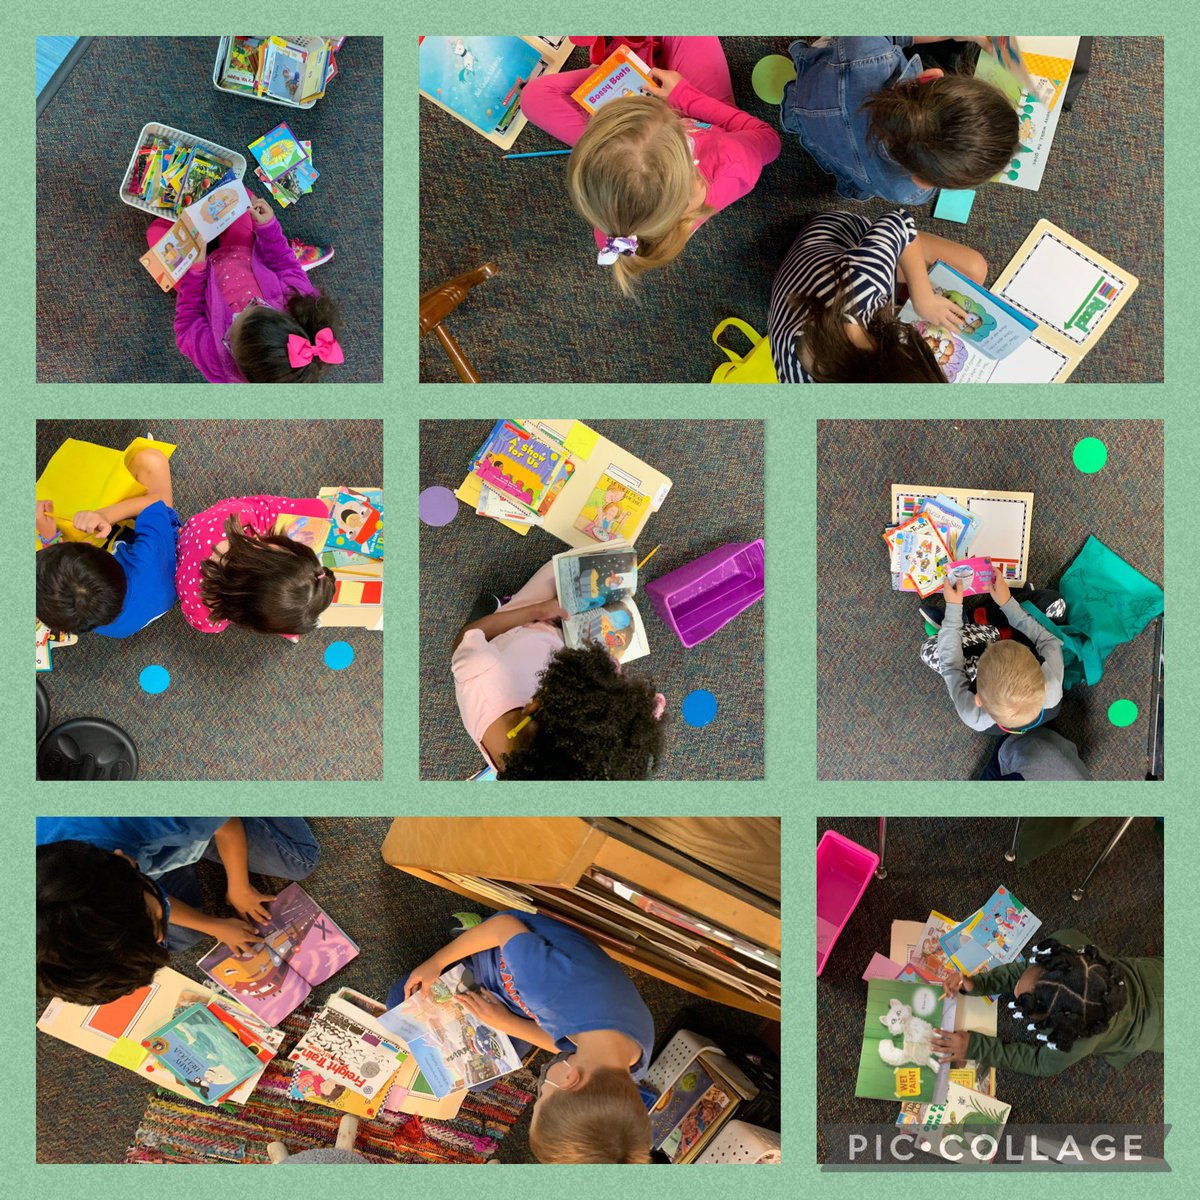 Lots of reading and book shopping in 1st grade today! @HamlinHawks13 @rochcommschools @mrs_stick